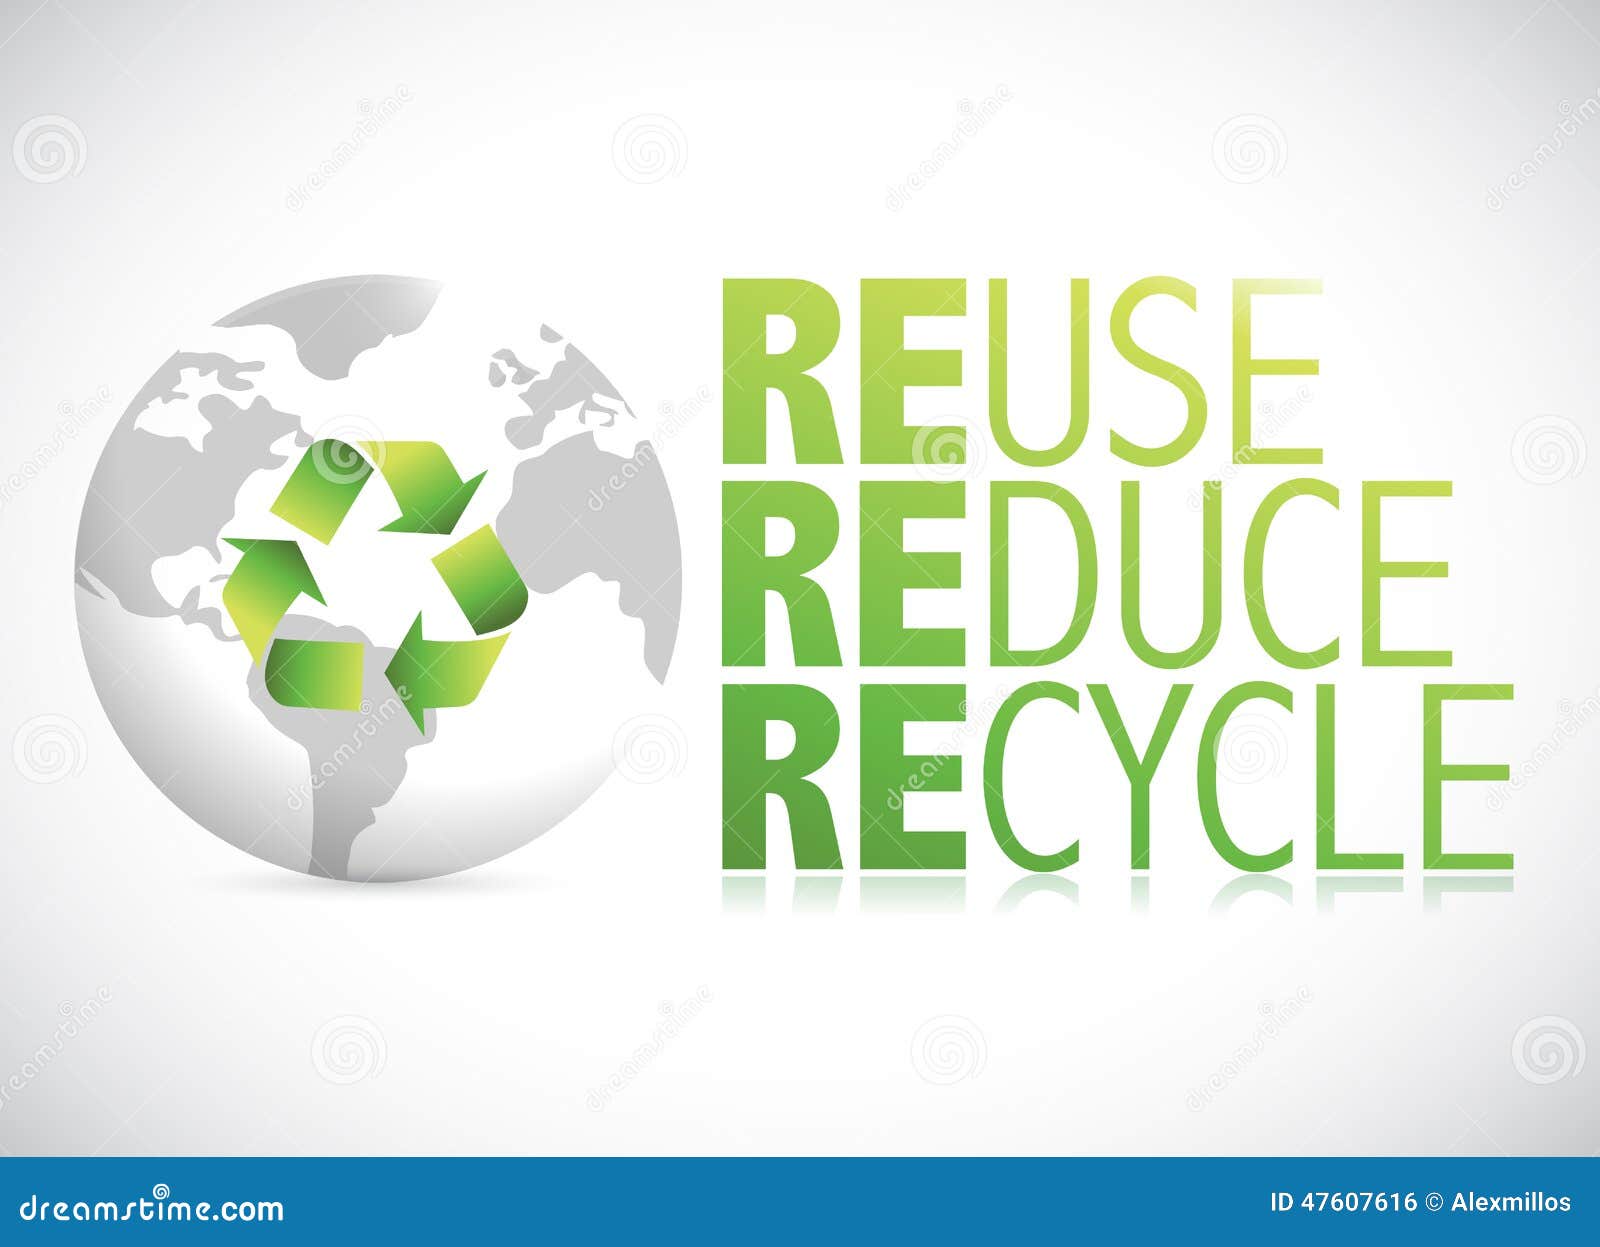 globe reduce, reuse, recycle sign